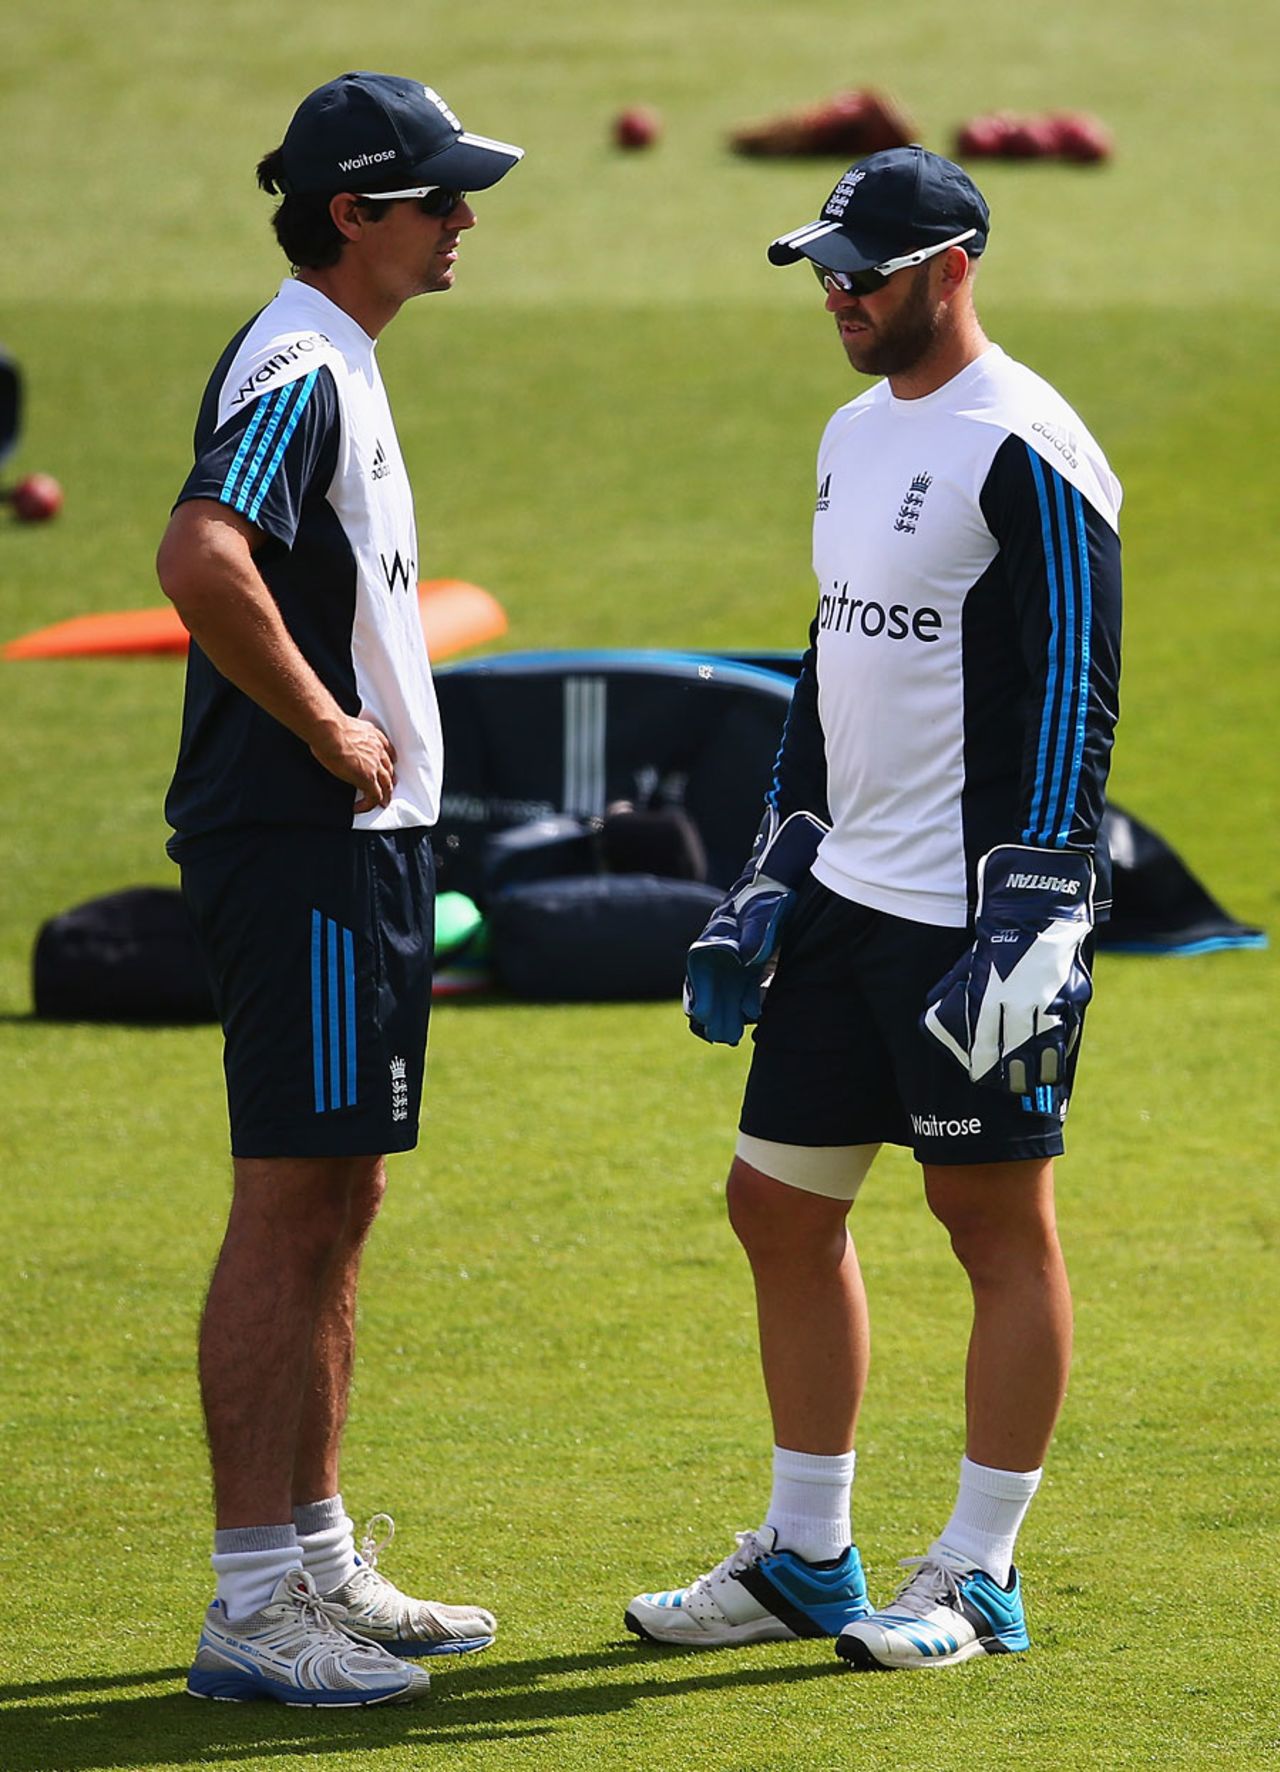 Matt Prior, with his thigh strapped, chats with Alastair Cook, Trent Bridge, July 8, 2014